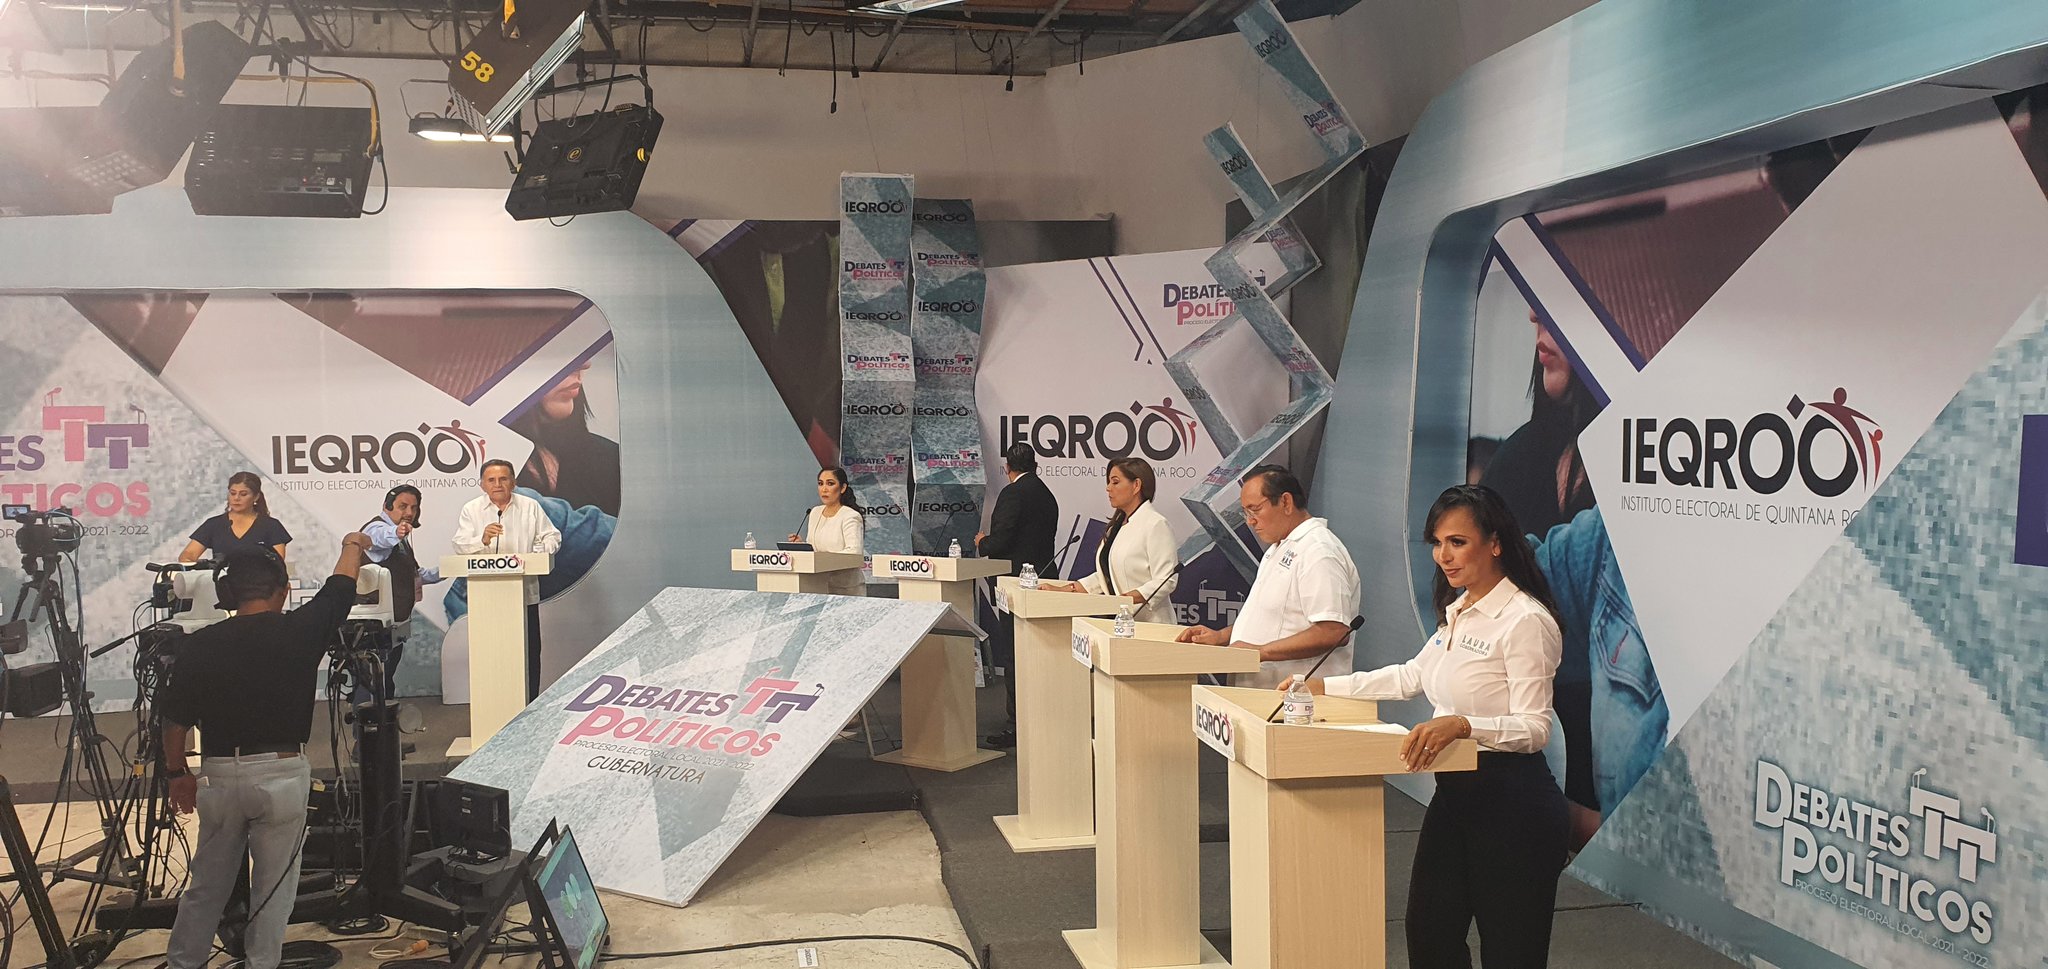 On the night of May 21, the debate between candidates for the governorship of Quintana Roo took place (Photo: Twitter/@MayraSanRomaCM)